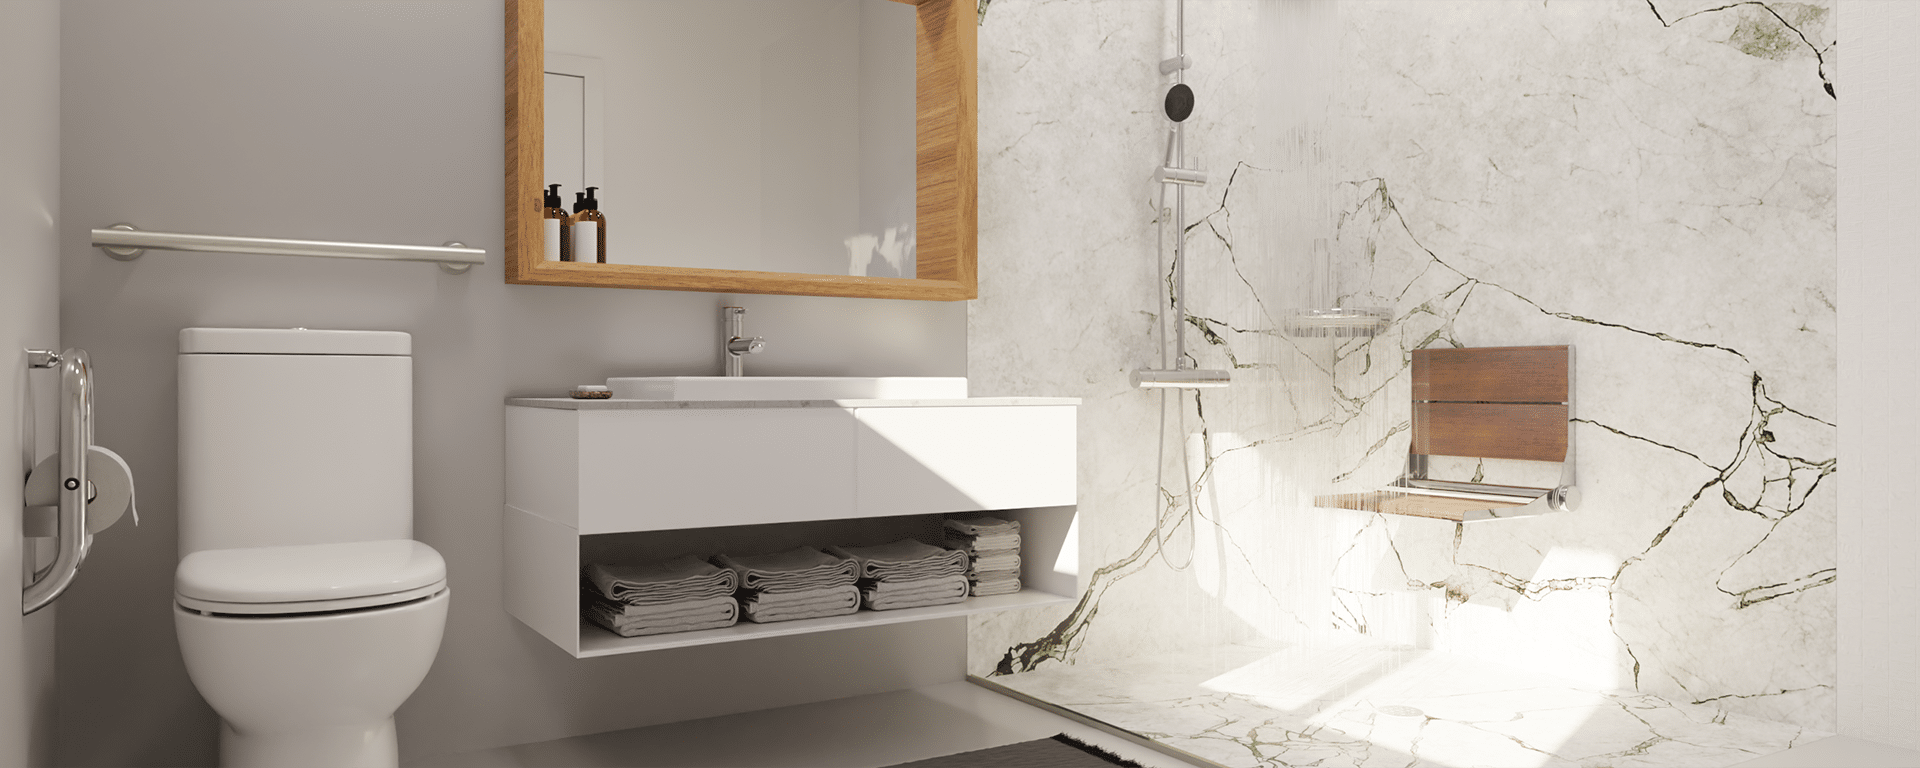 Modern bathroom with safety accessories